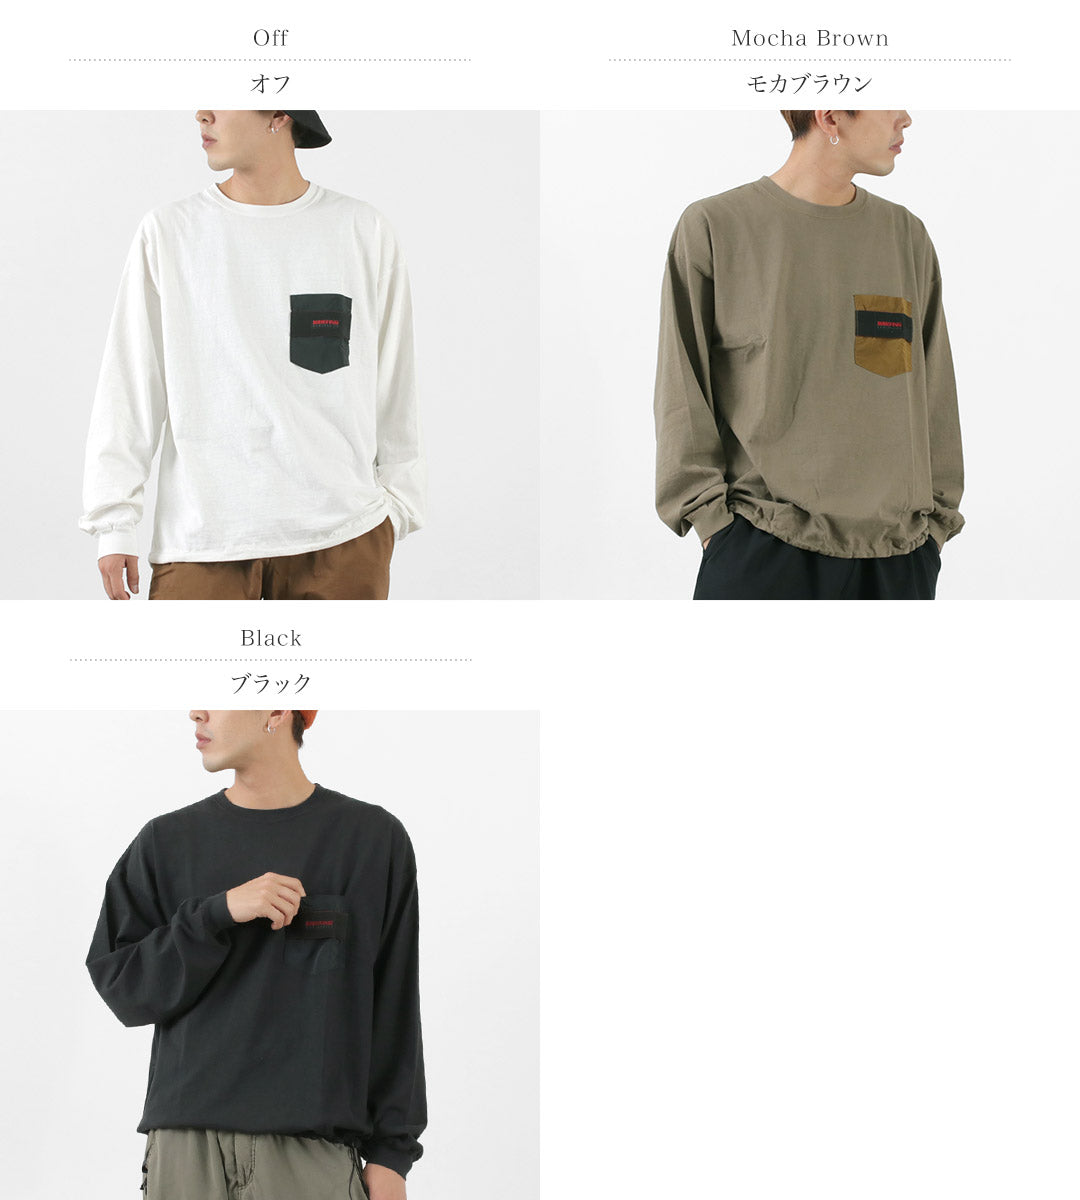 REMI RELIEF × BRIEFING（レミレリーフ × ブリーフィング） ロングスリーブTシャツ1 / ロンT カットソー ポケT 長袖 メンズ 日本製 クリスマス プレゼント ギフト